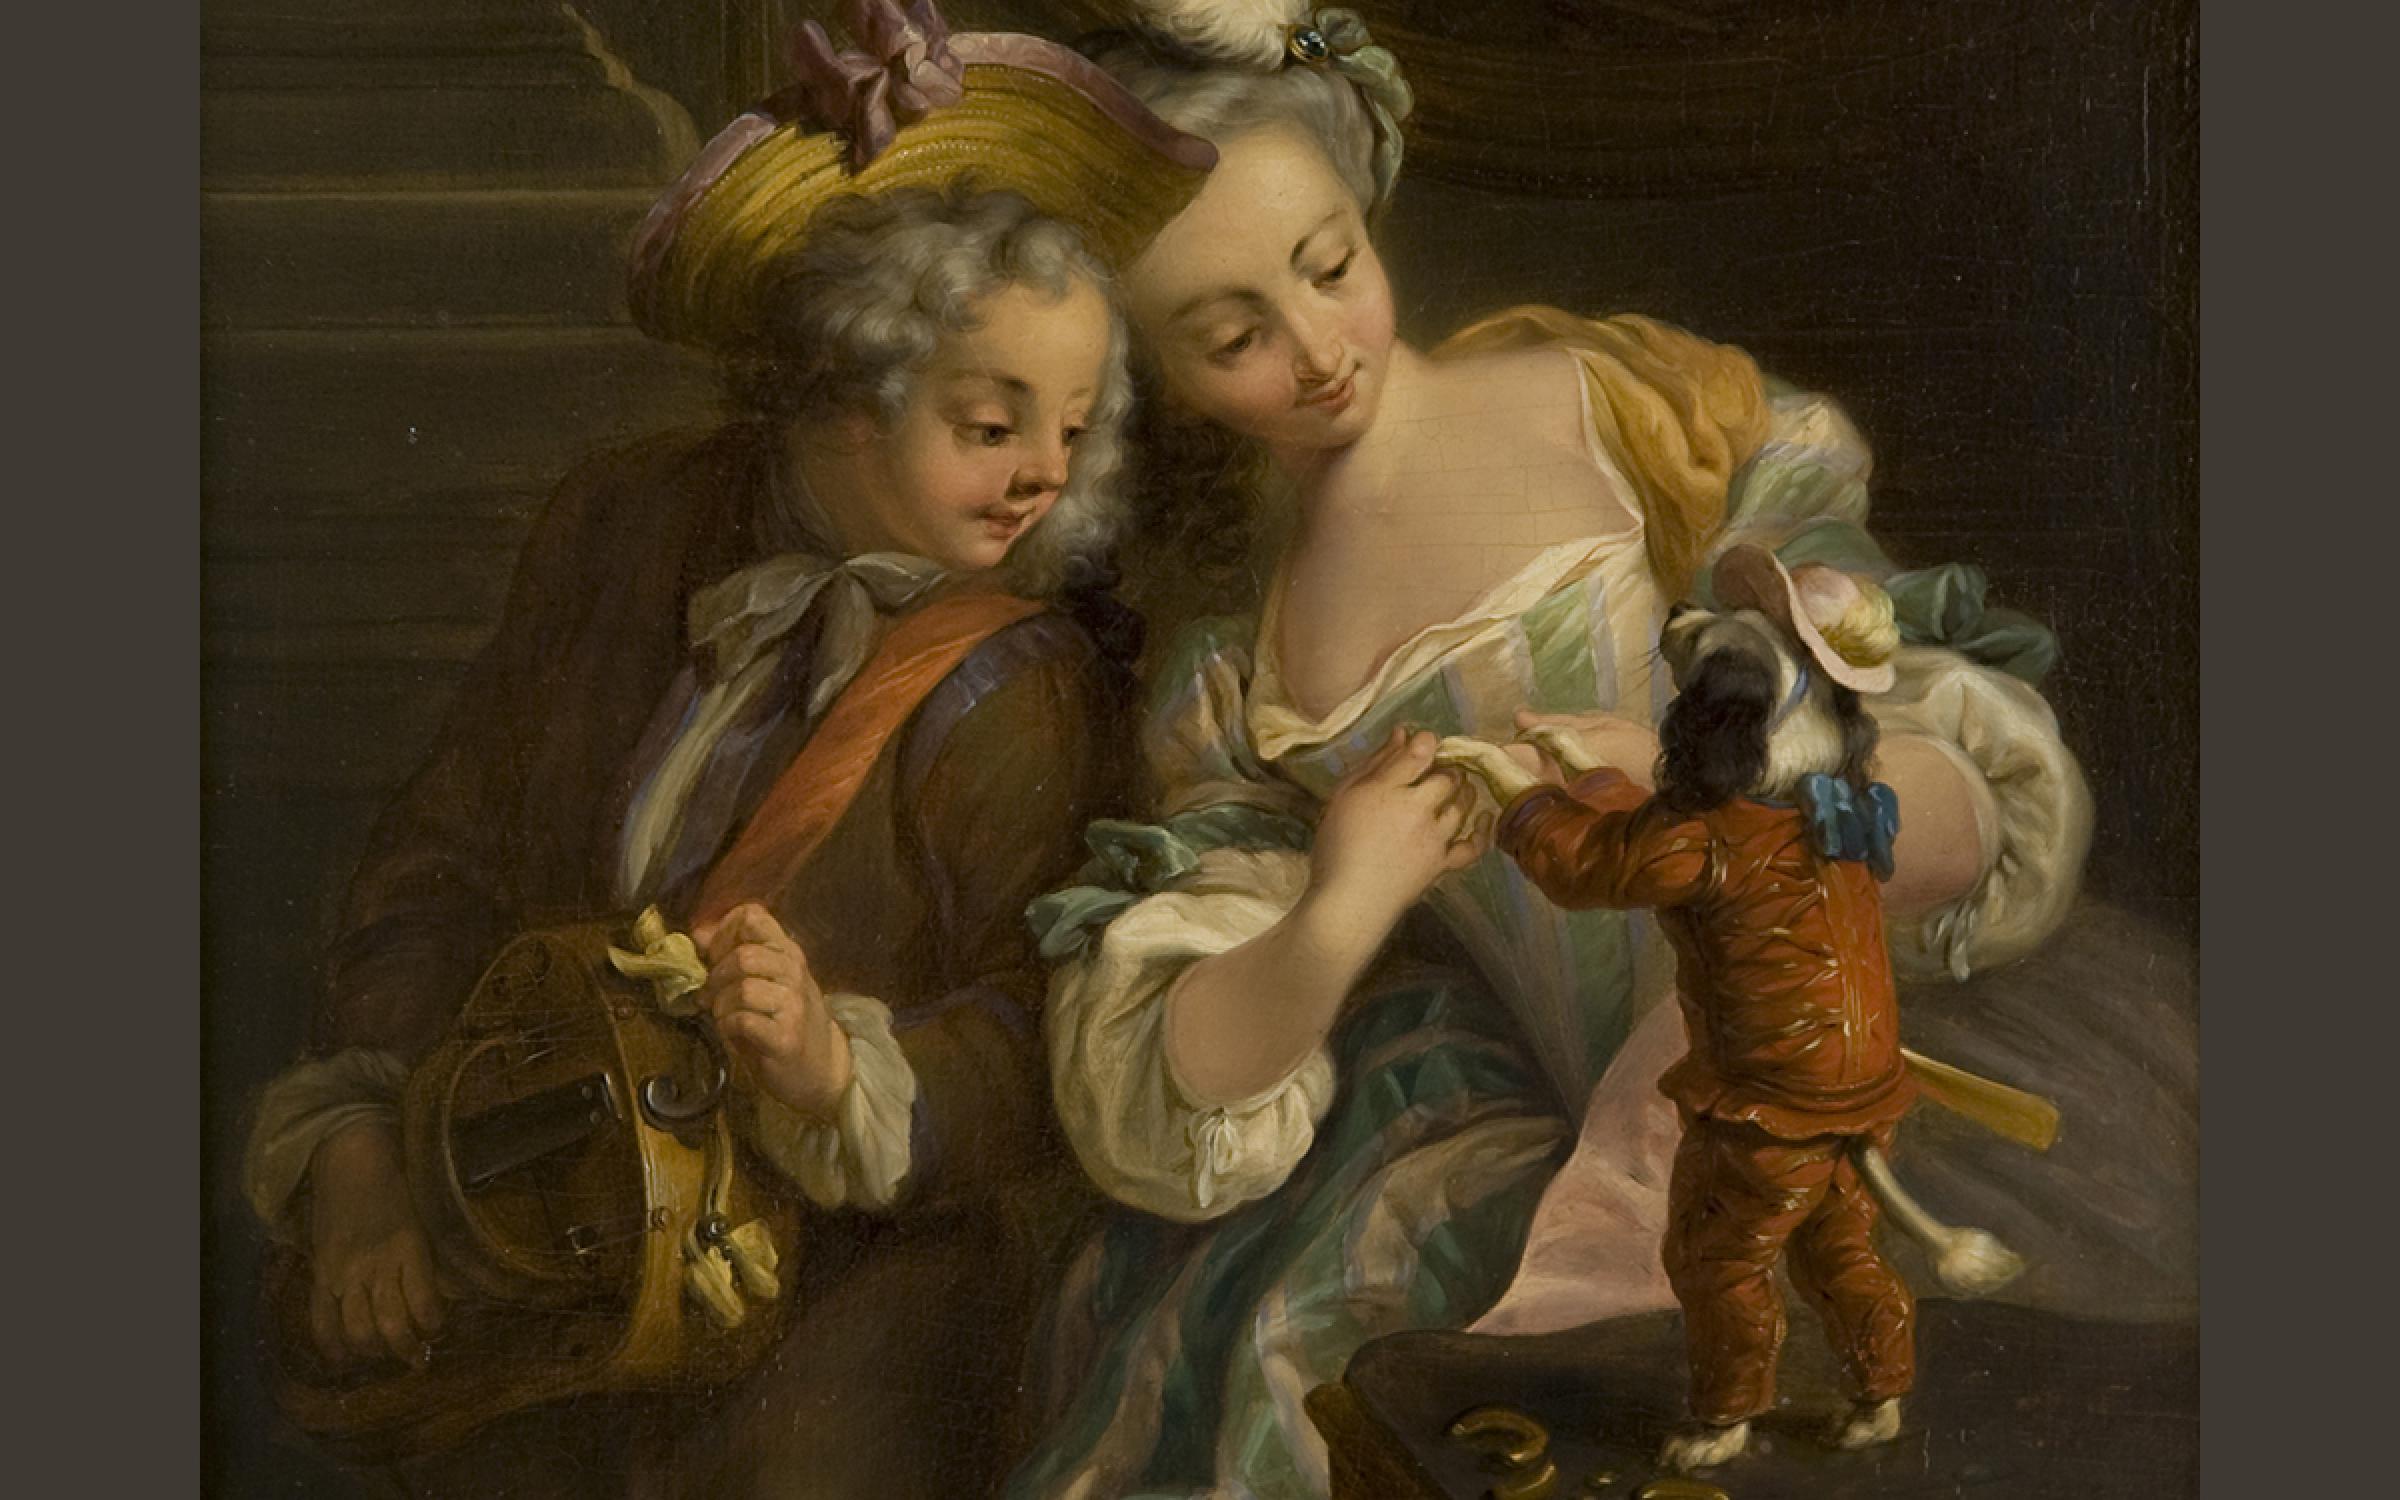 Charles Dominique Eisen, (French, 1720-1778), Le chien dansant (The Dancing Dog), ca. 1740-1778, oil on panel, 9x7 5/8 in., gift of Val A. Browning, The Val A. Browning Memorial Collection of 500 Years of European Masterworks, UMFA1993.034.009